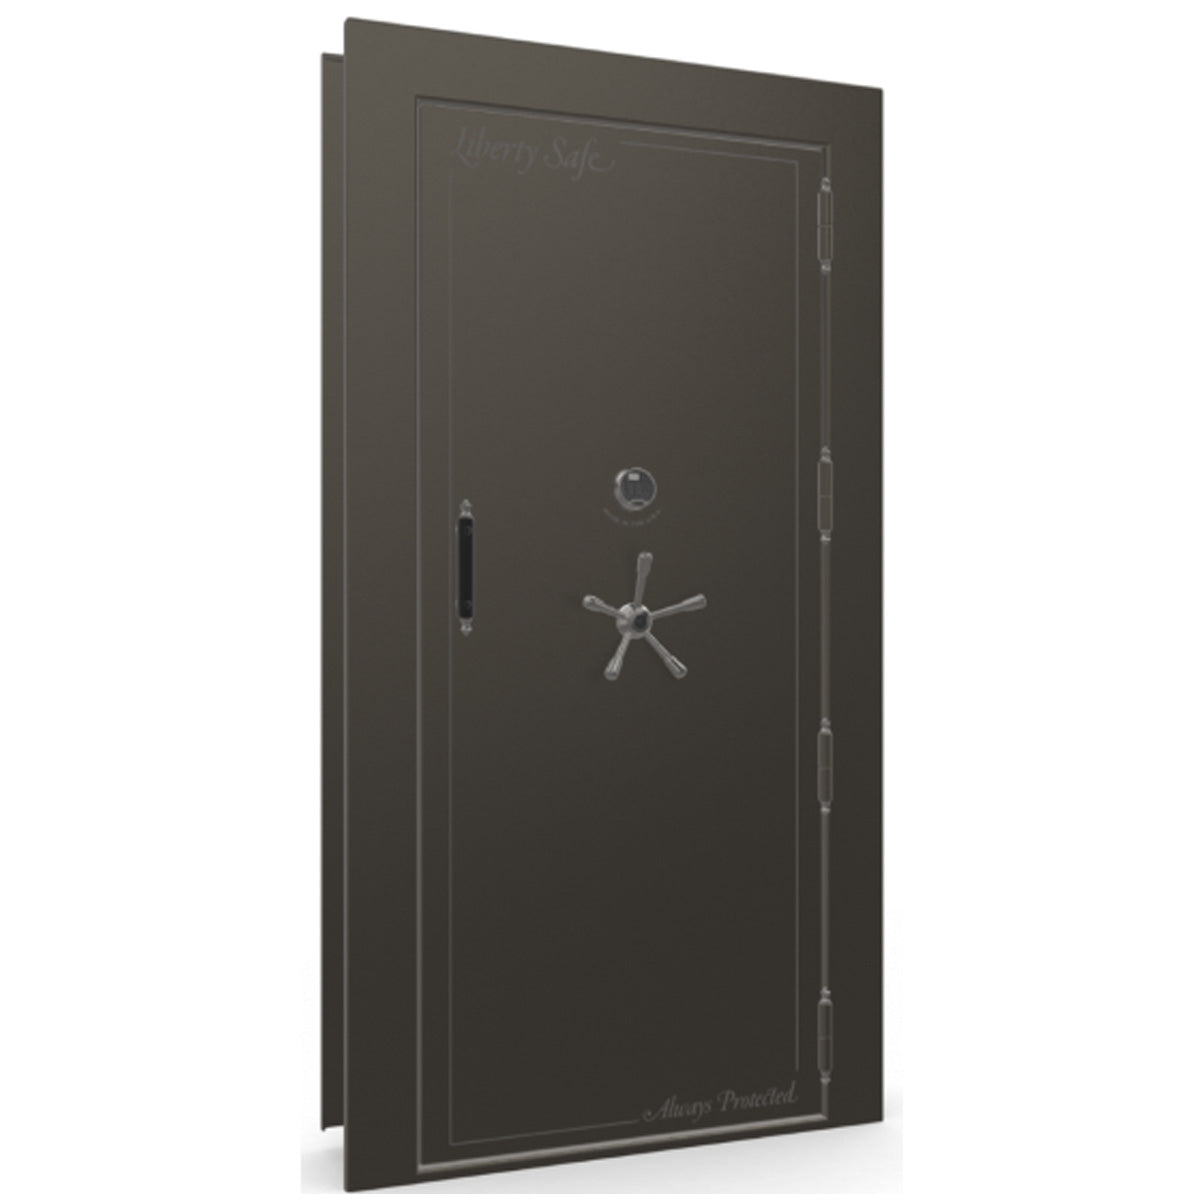 The Beast Vault Door in Gray Marble with Black Chrome Electronic Lock, Right Outswing, door closed.